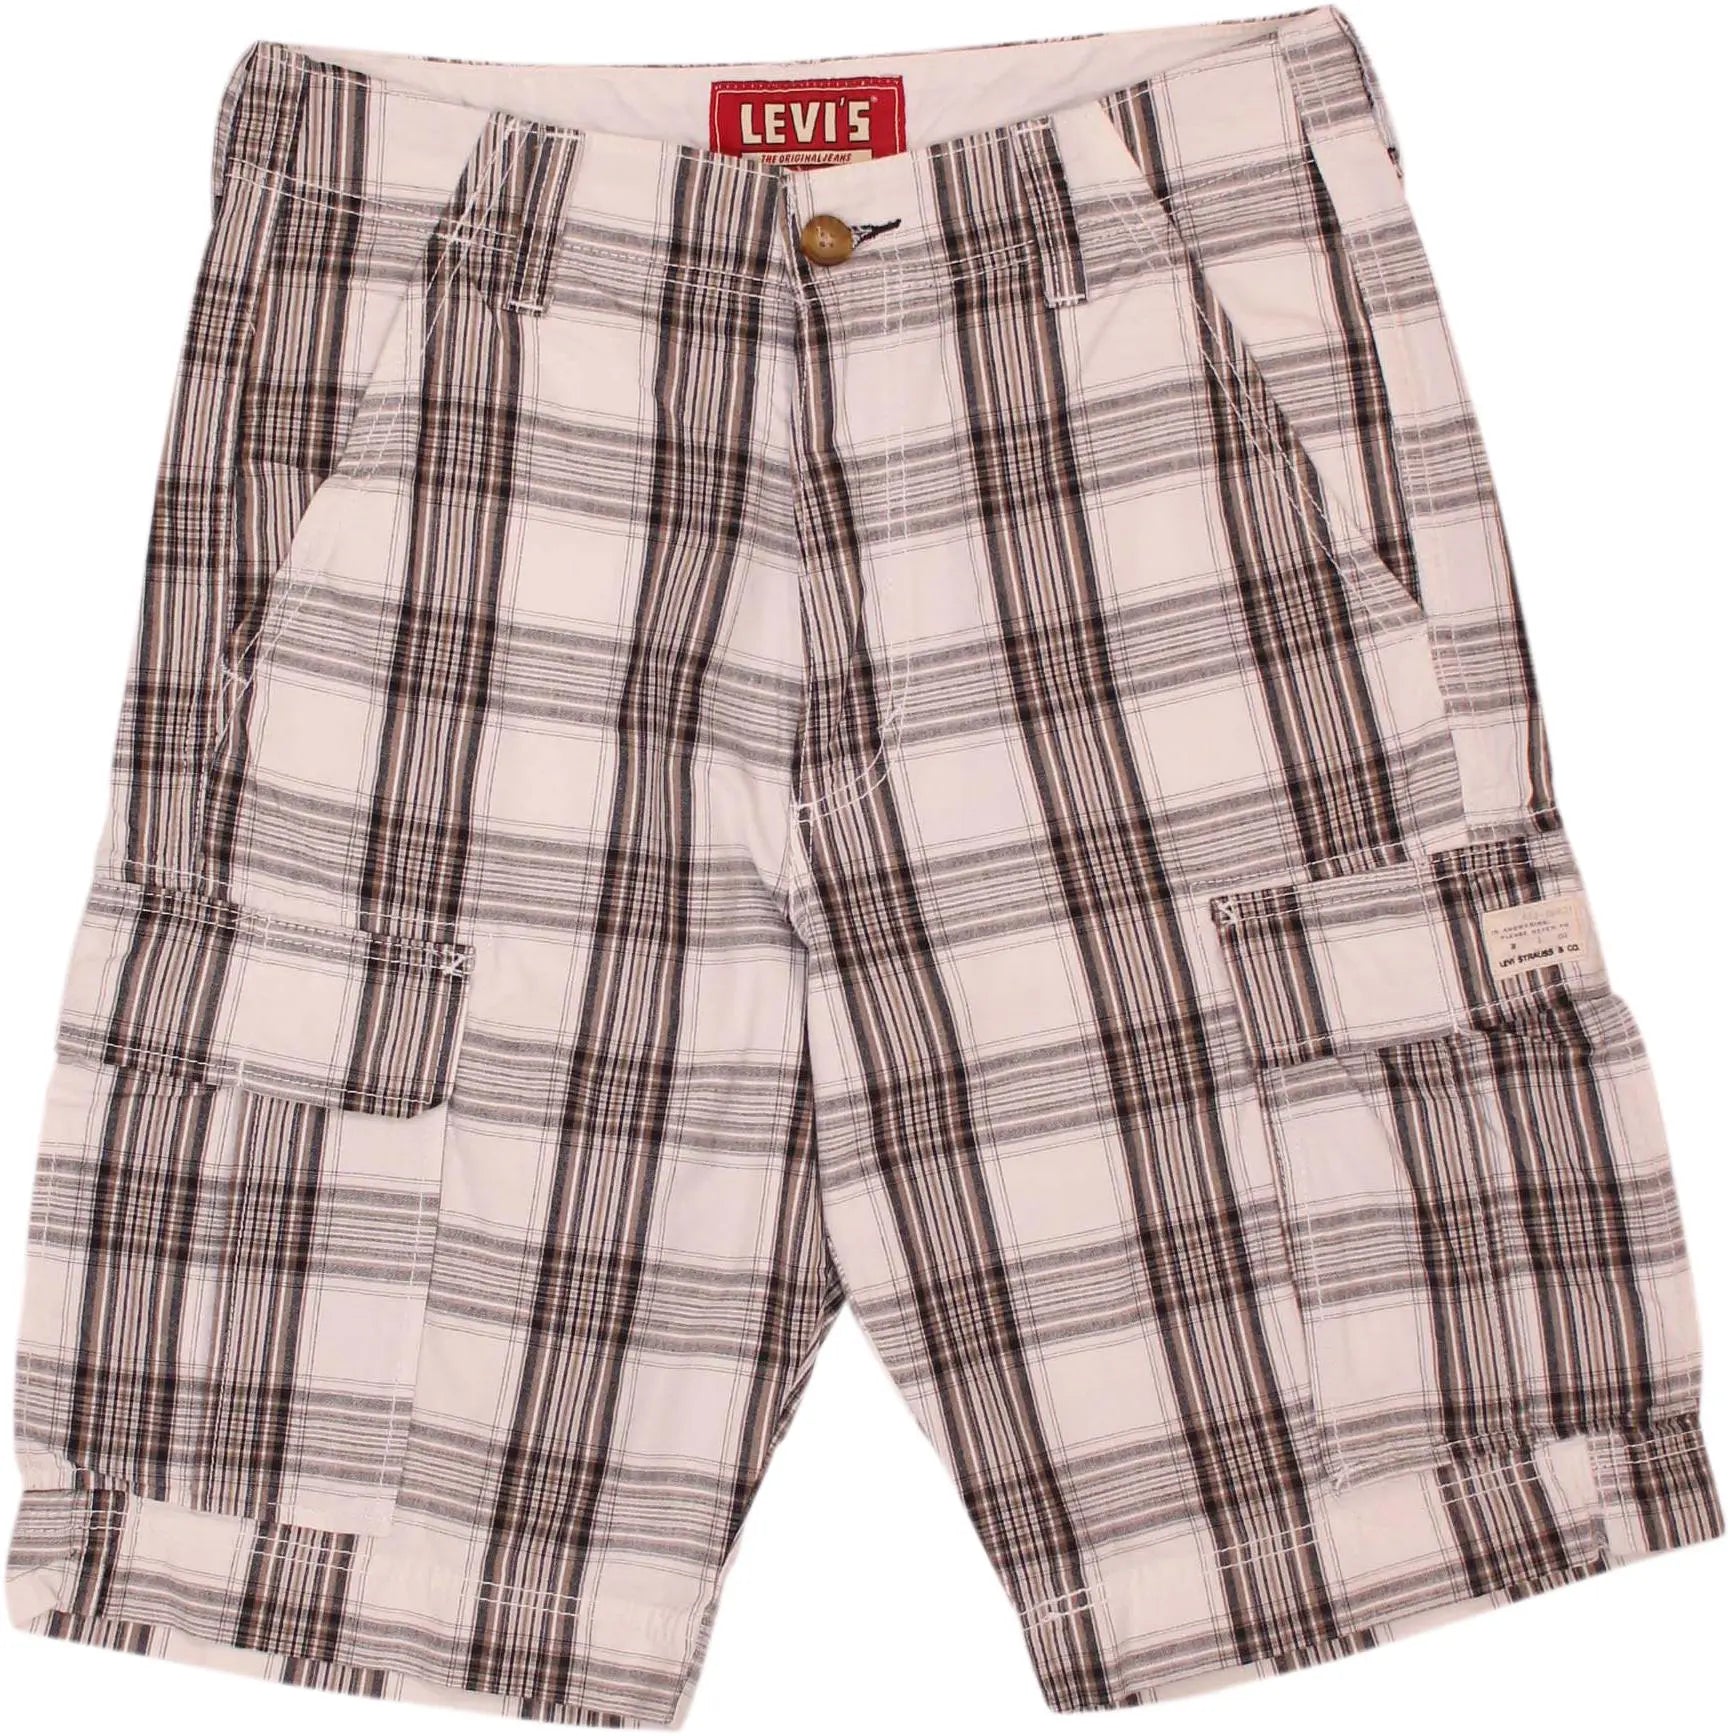 Levi's - Checked Shorts by Levi's- ThriftTale.com - Vintage and second handclothing